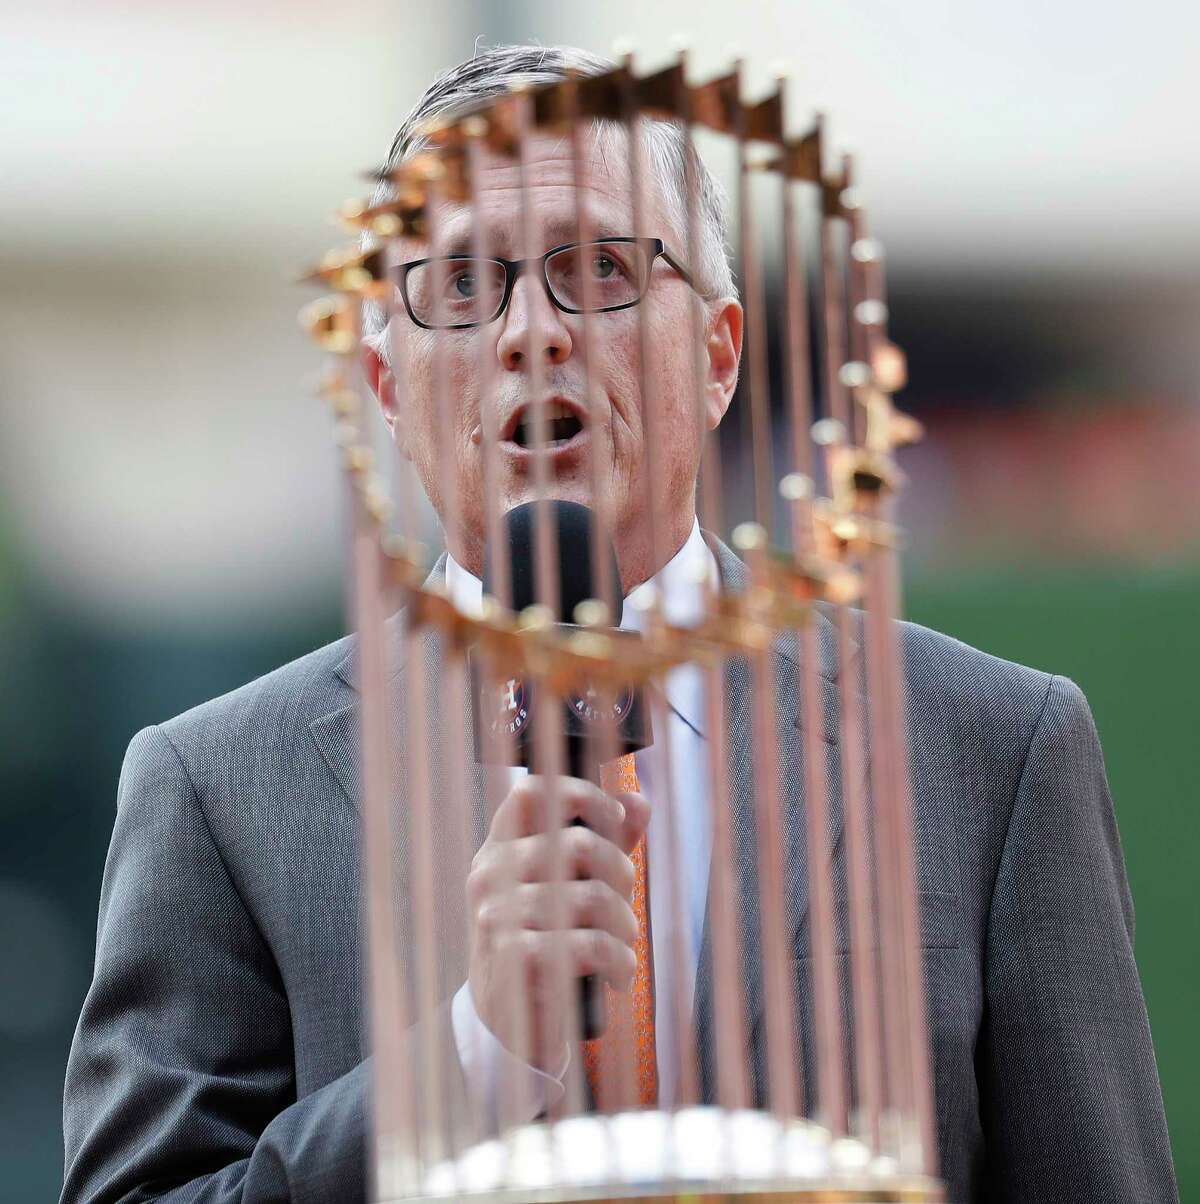 Houston Astros GM Jeff Luhnow speaks to the fans behind the World Series trophy during the pre-game ceremony before the start of the home opener during an MLB baseball game at Minute Maid Park, Monday, April 2, 2018, in Houston.